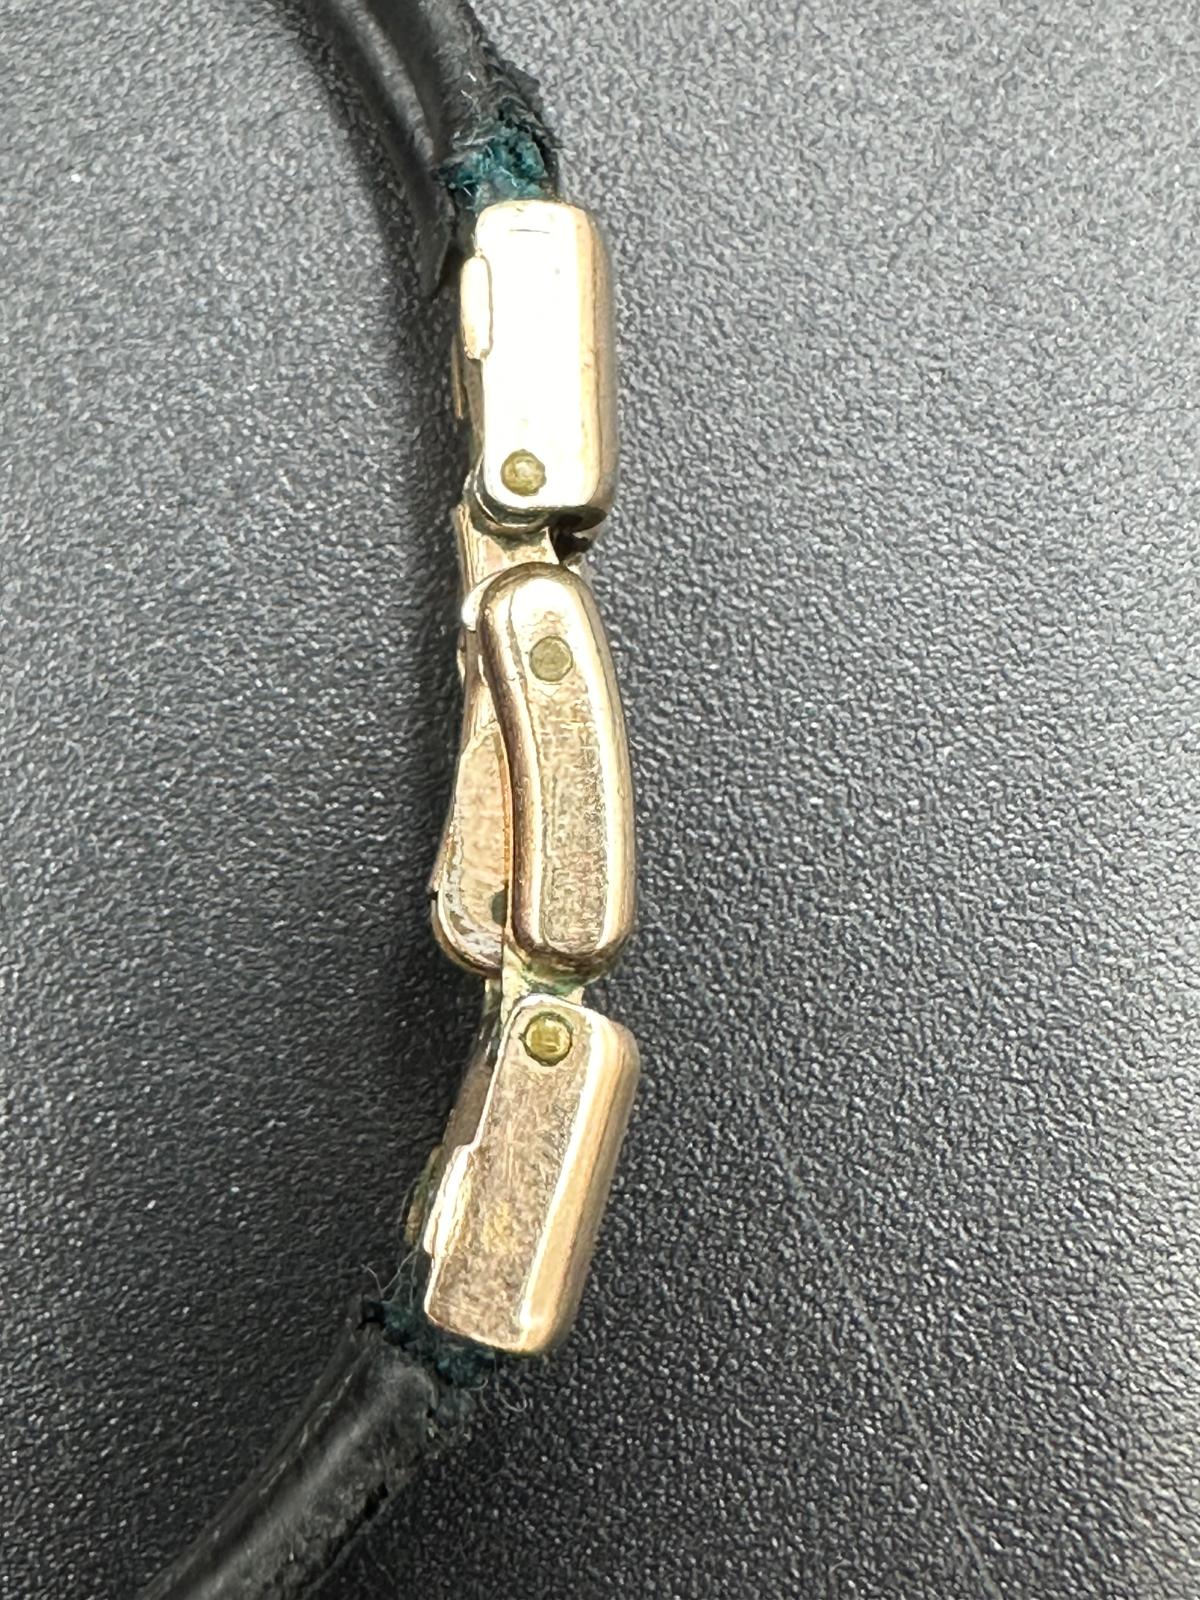 A rare ladies Omega gold watch on leather bracelet with image of a Sheik's head. - Image 3 of 4